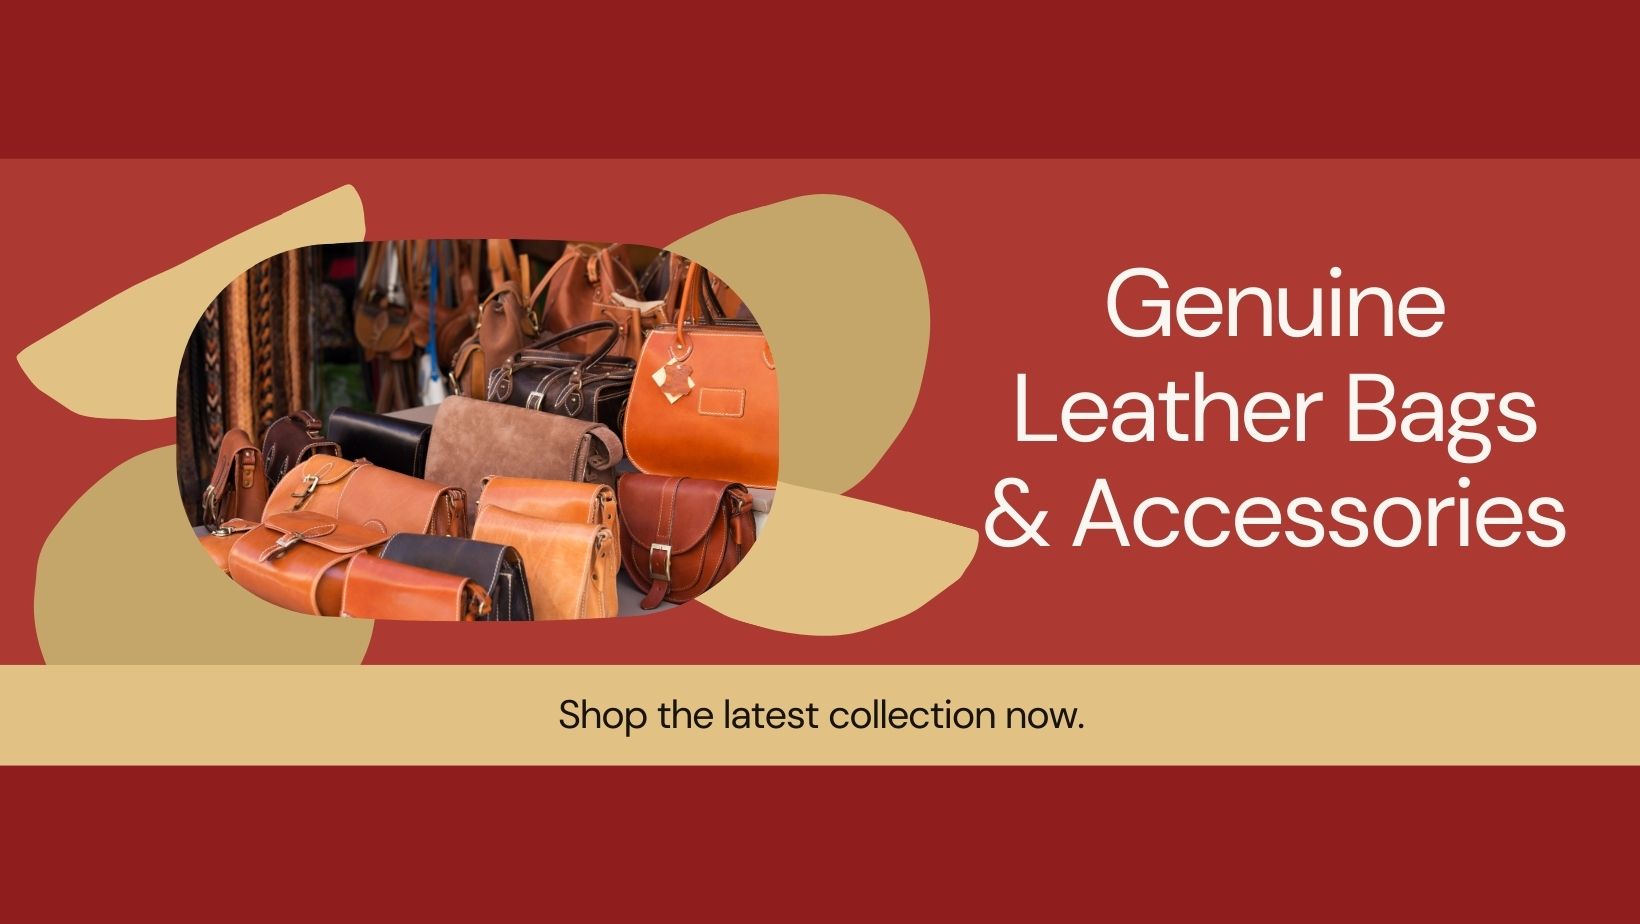 Premium Genuine Leather Bags & Accessories: Shop Now for Timeless Elegance!